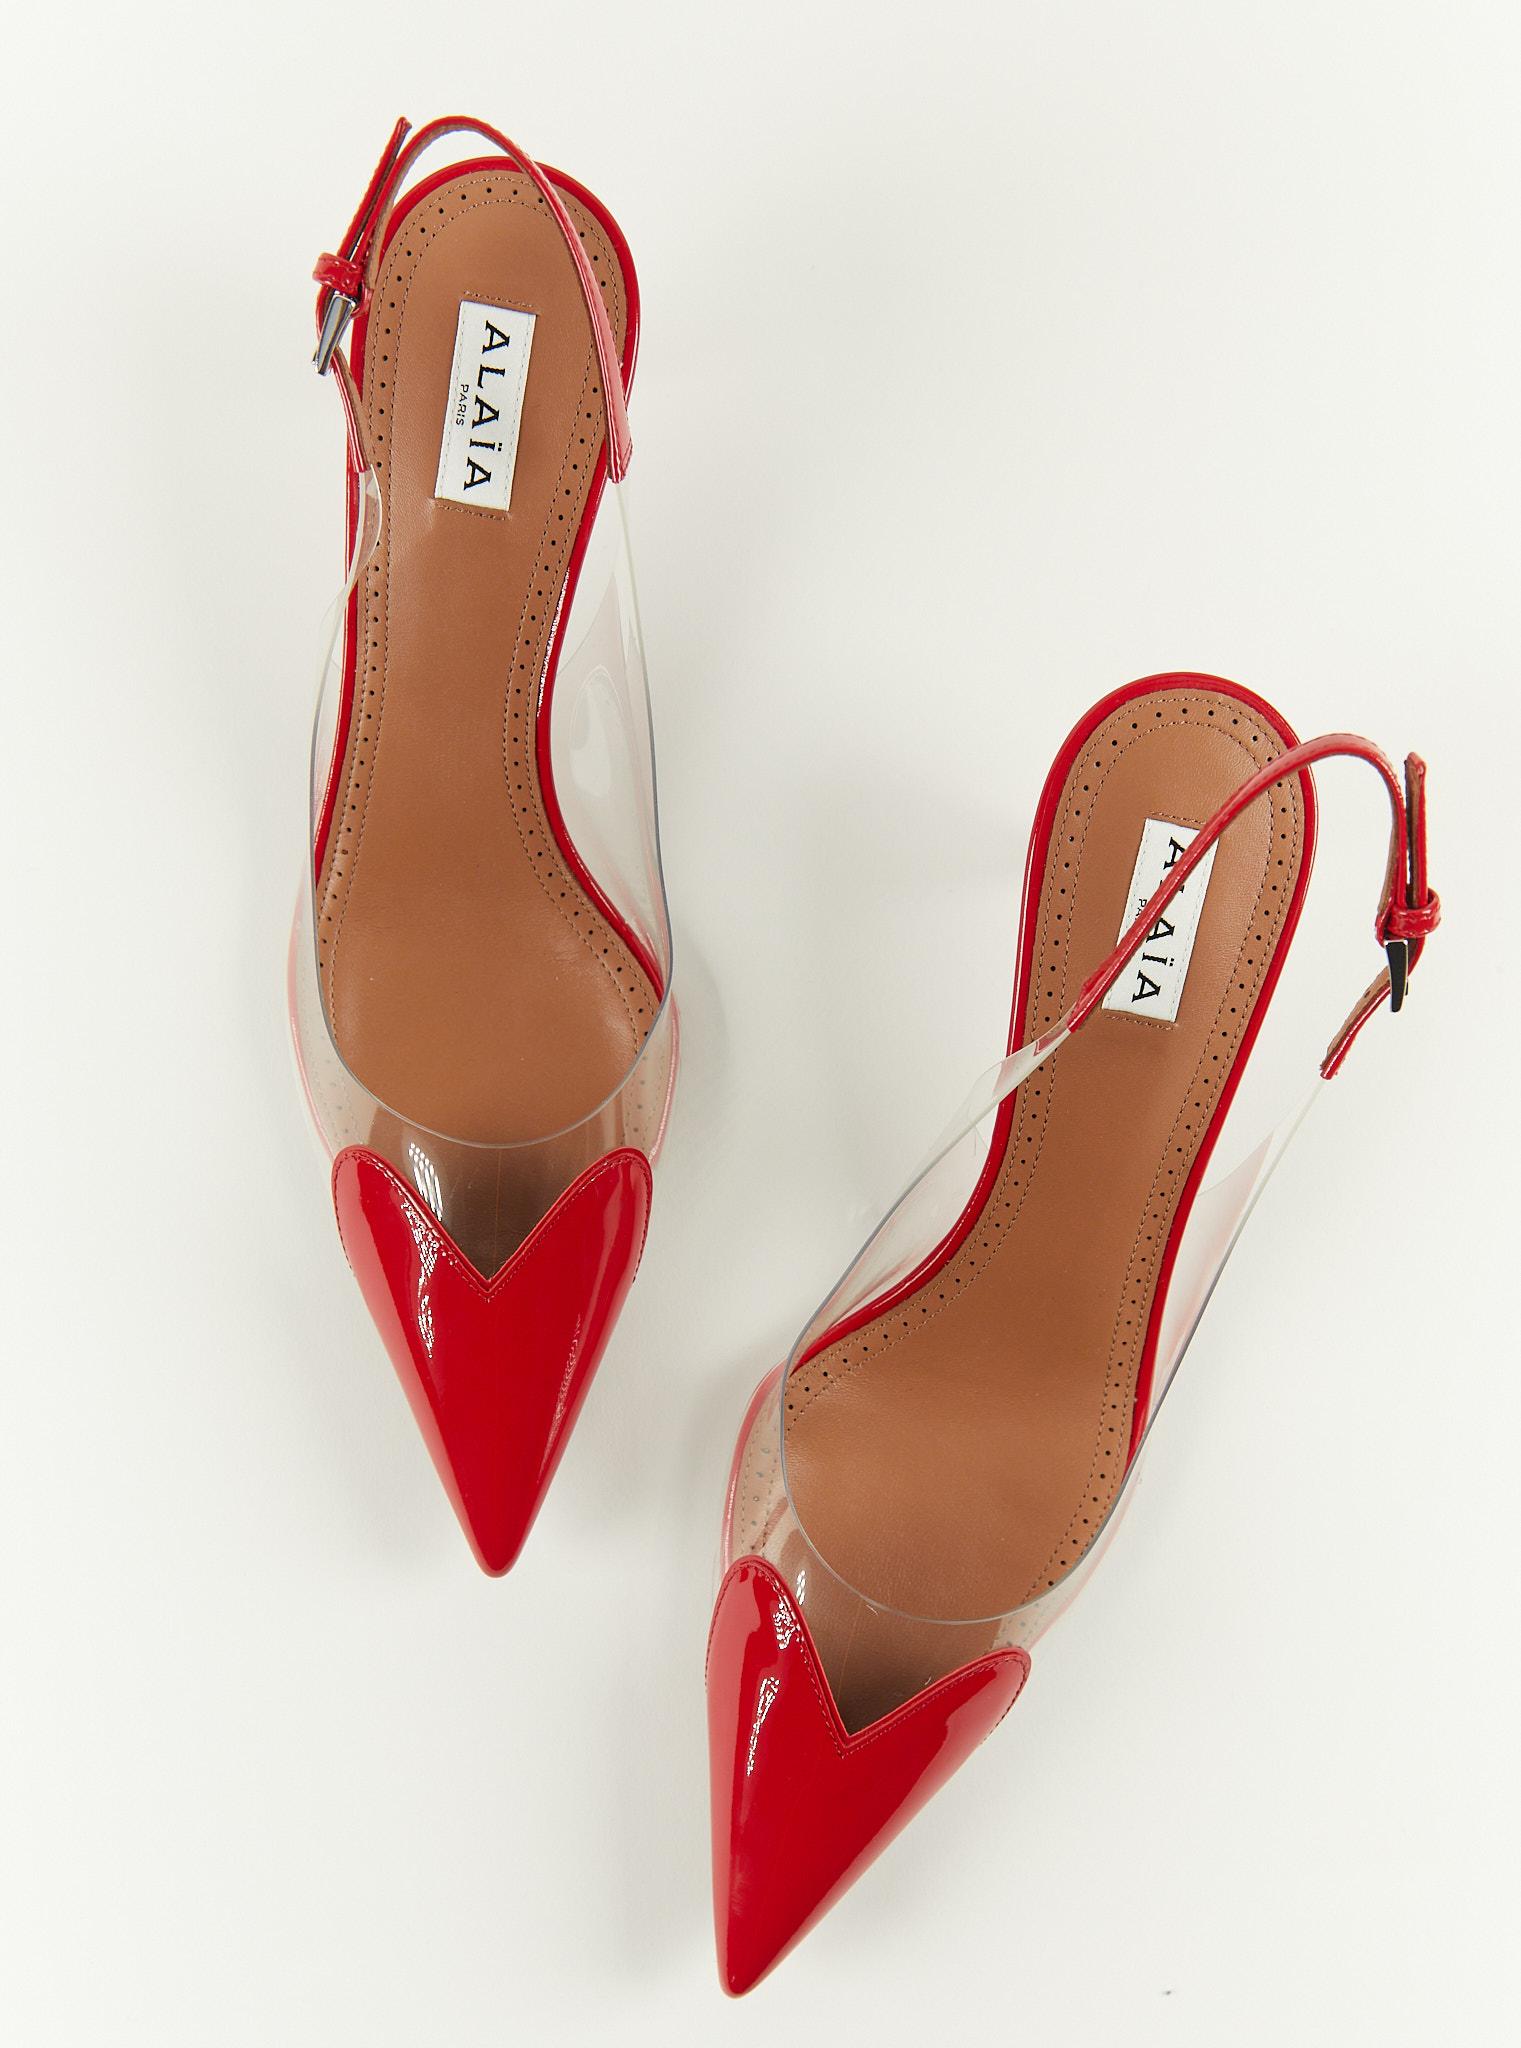 ALAÏA Heart 55 PVC Pumps In New Condition For Sale In London, GB